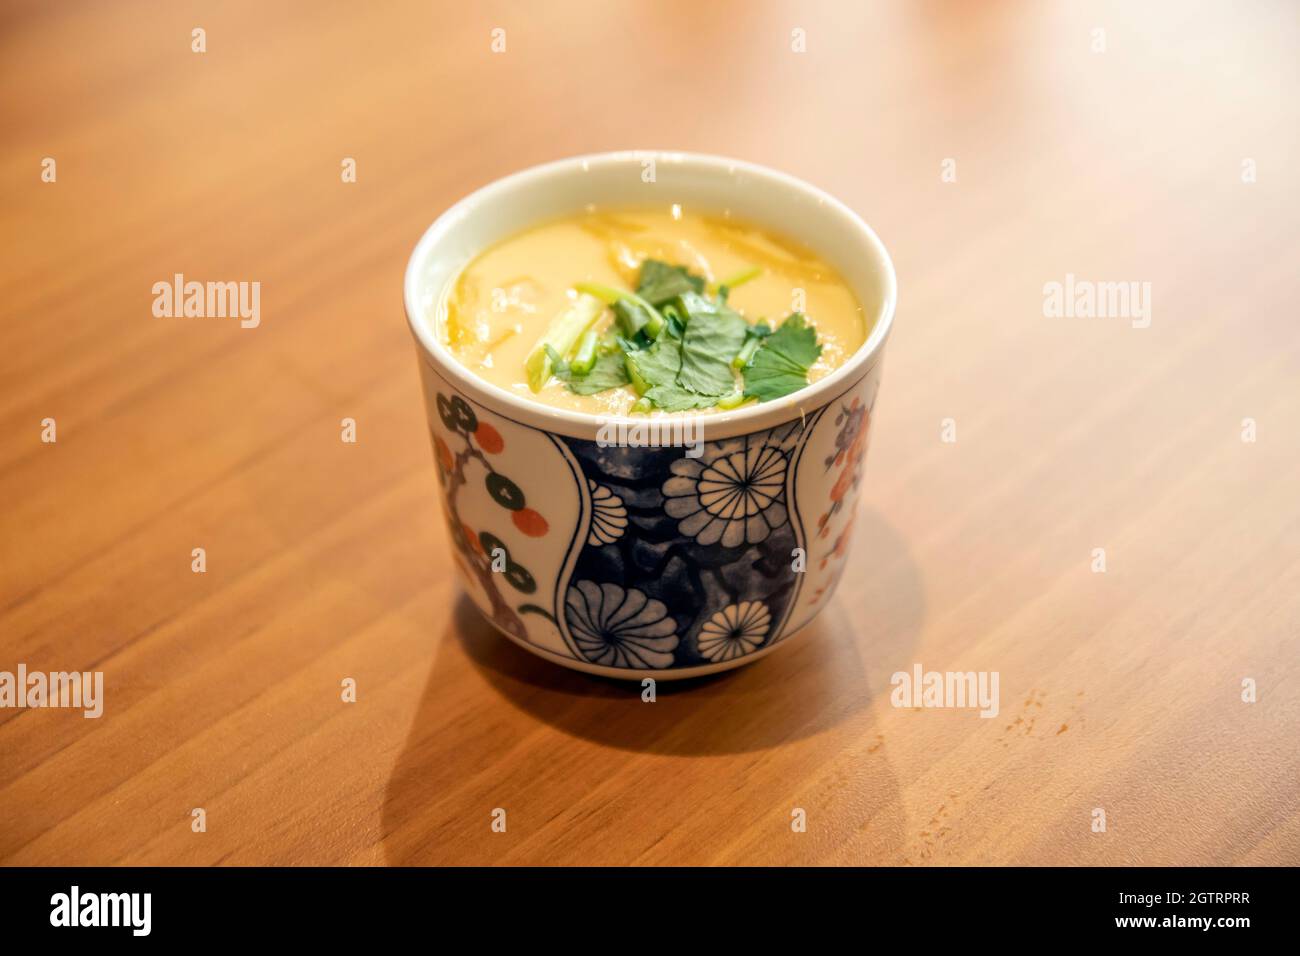 High Angle View Of Food In Bowl On Table Stock Photo